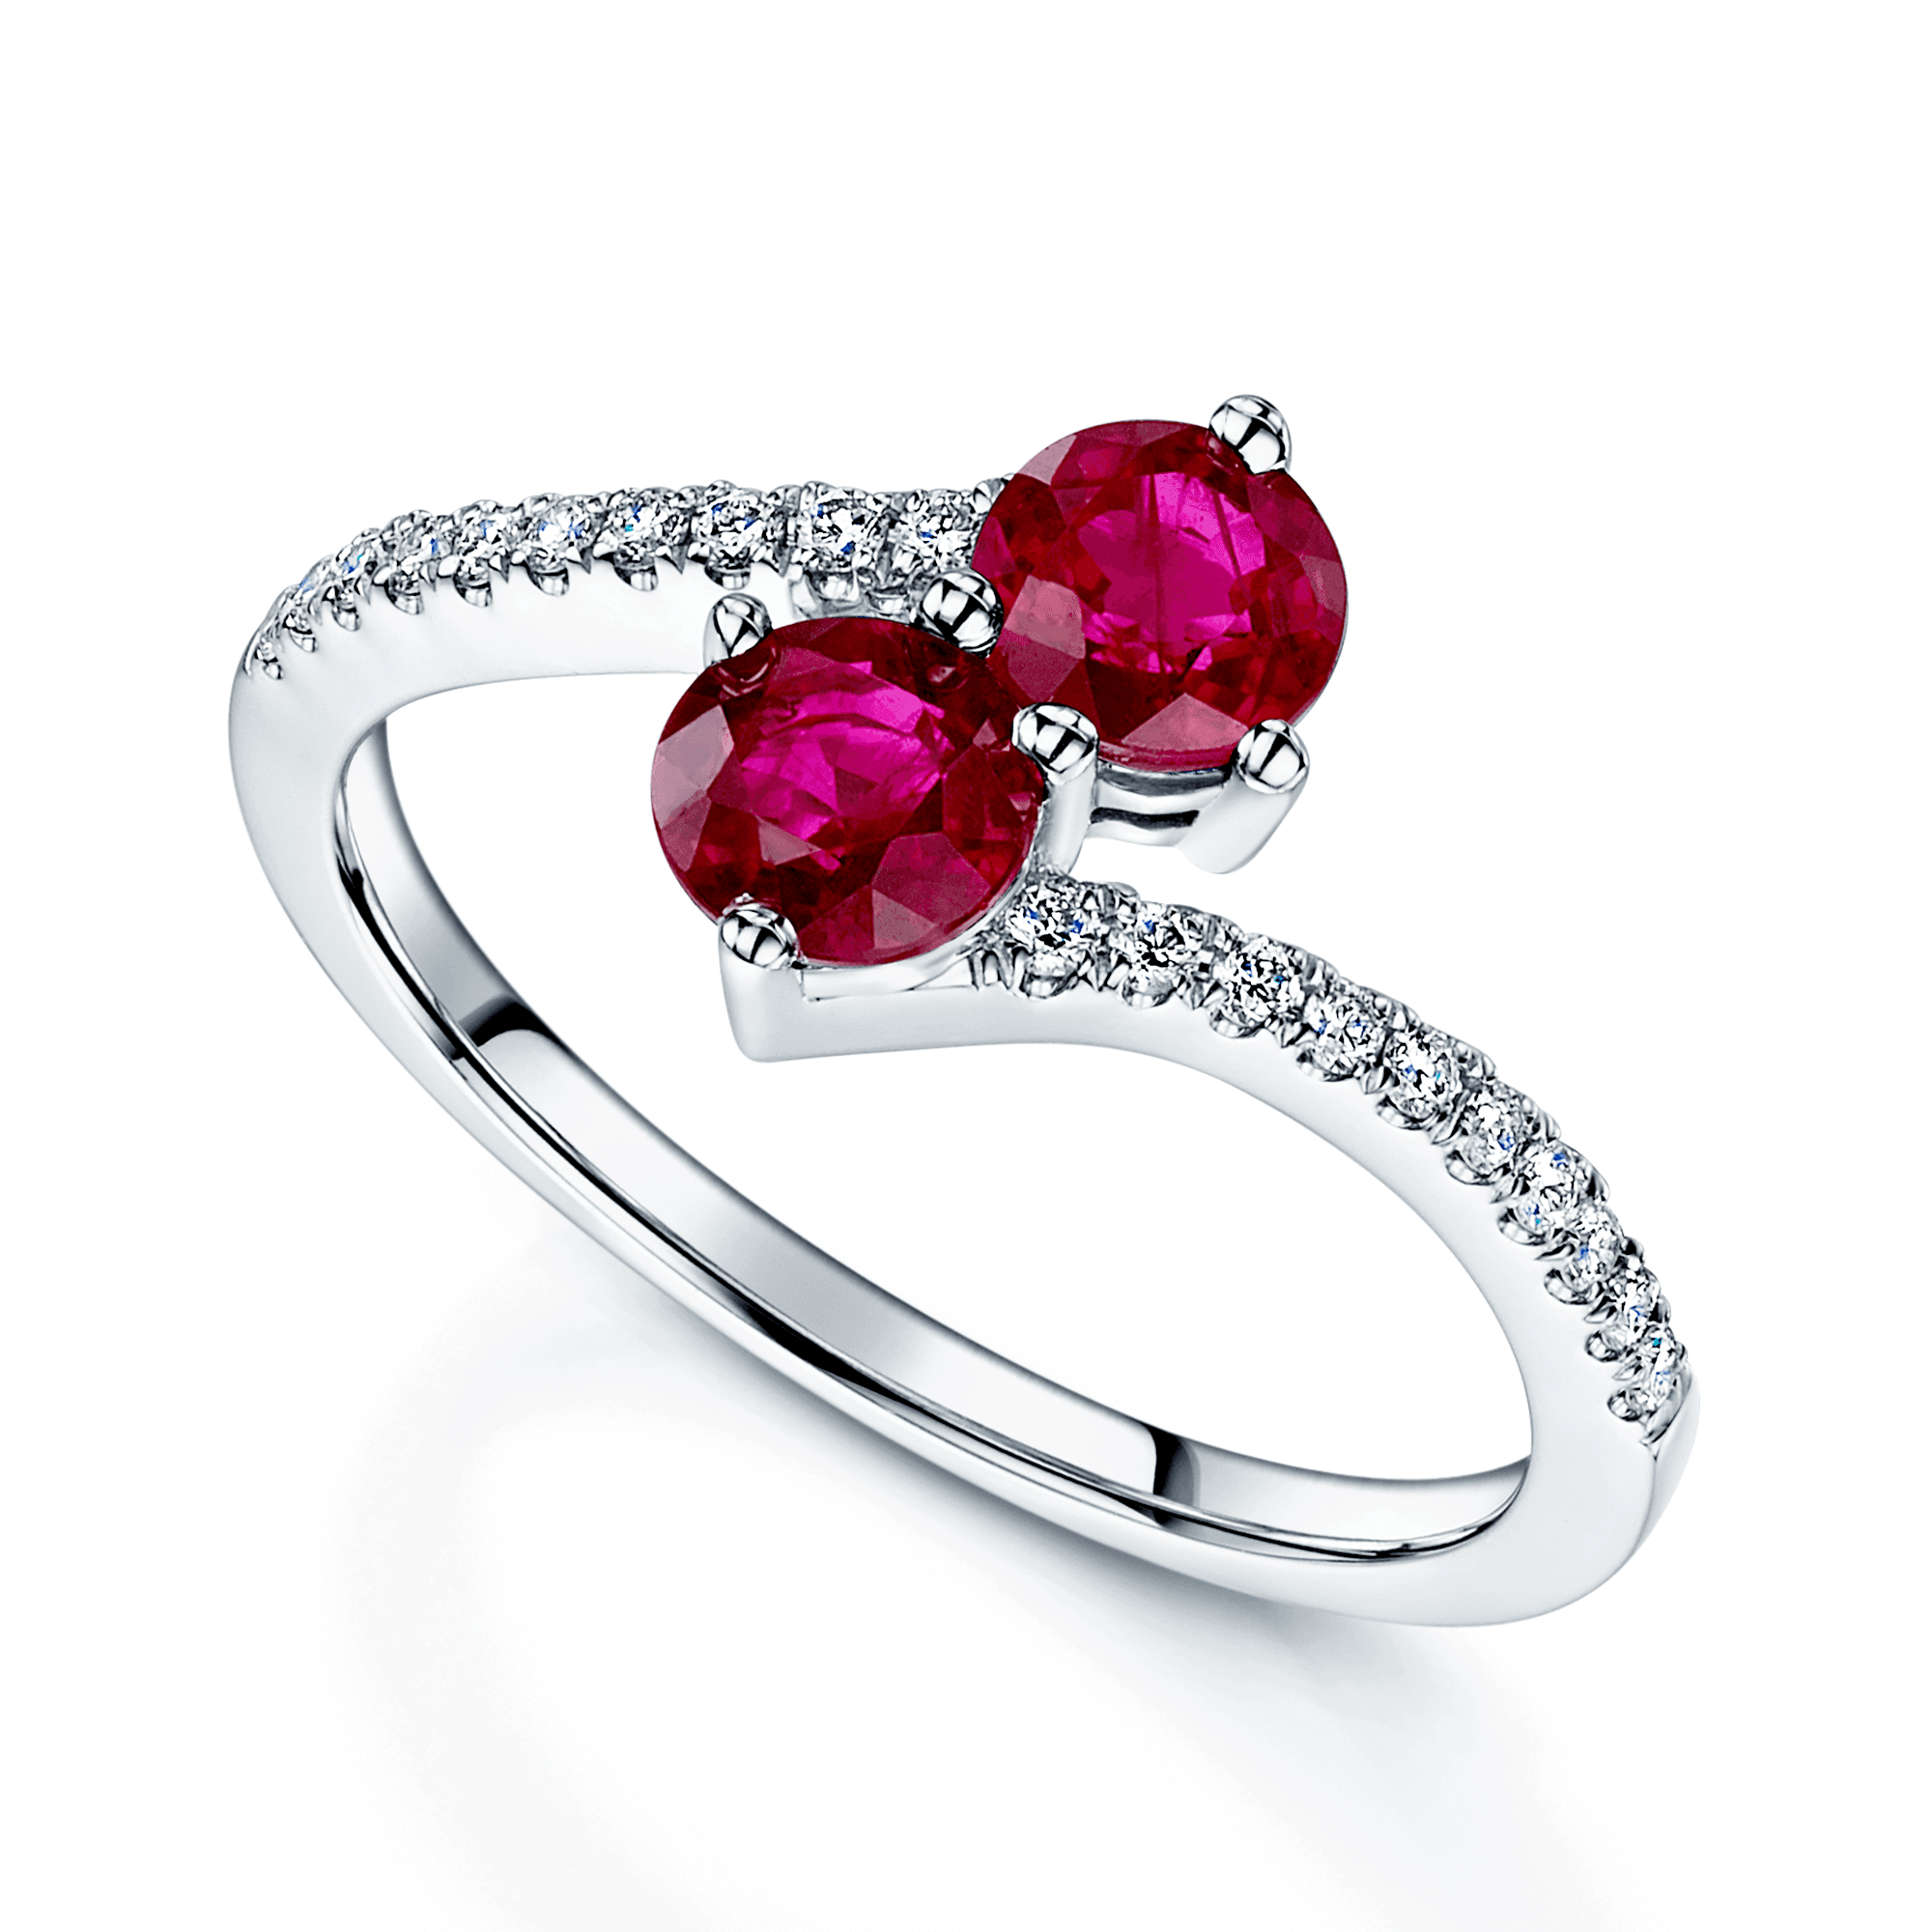 Platinum Round Brilliant Cut Ruby Two Stone Twist Ring With Diamond Set Shoulders